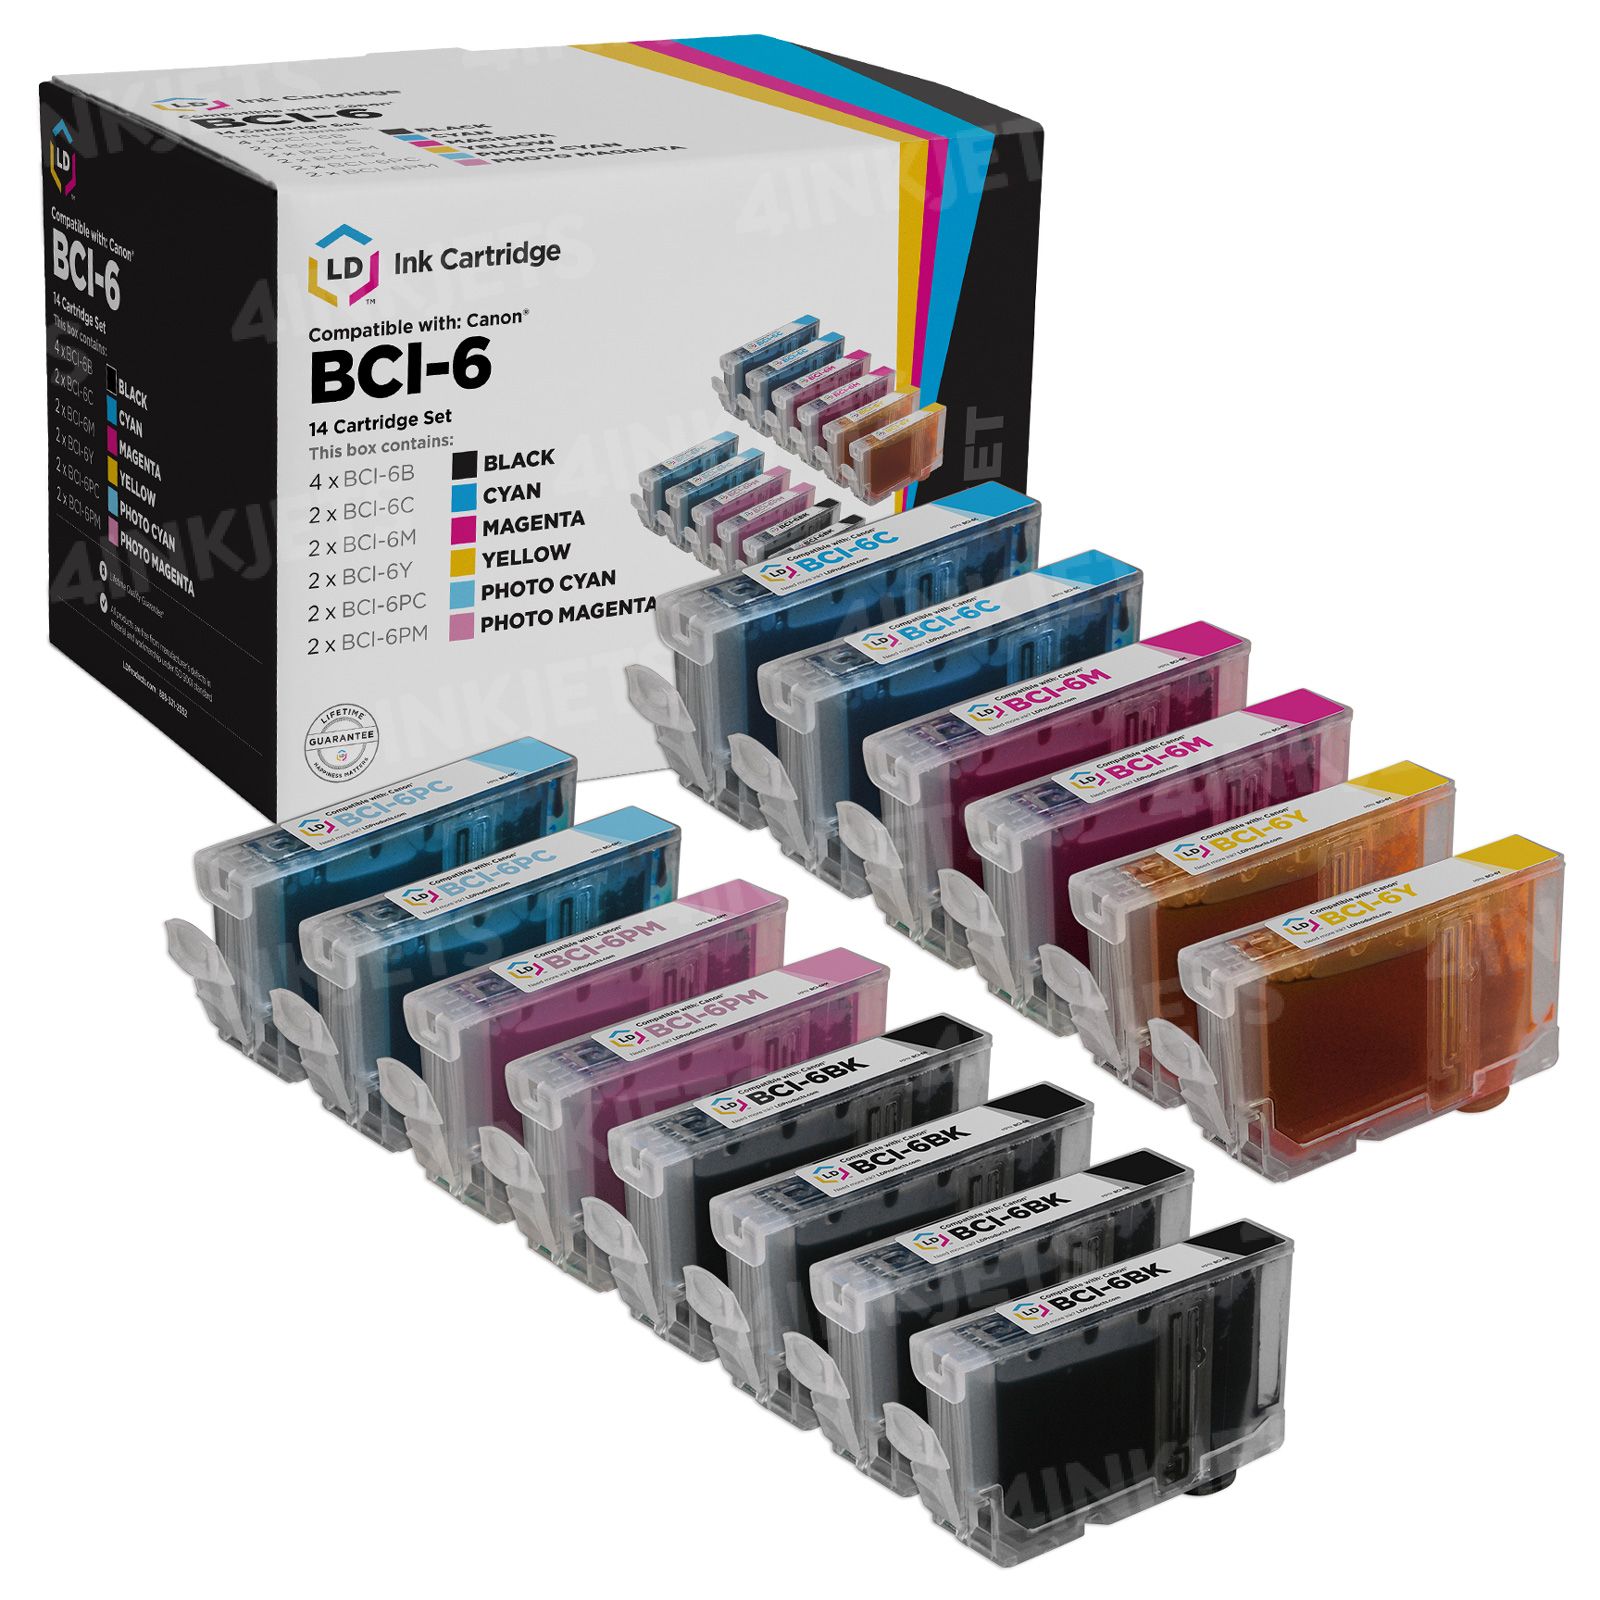 Affordable 14-Cartridge Set For Canon BCI6JUMBO Ink - 4inkjets